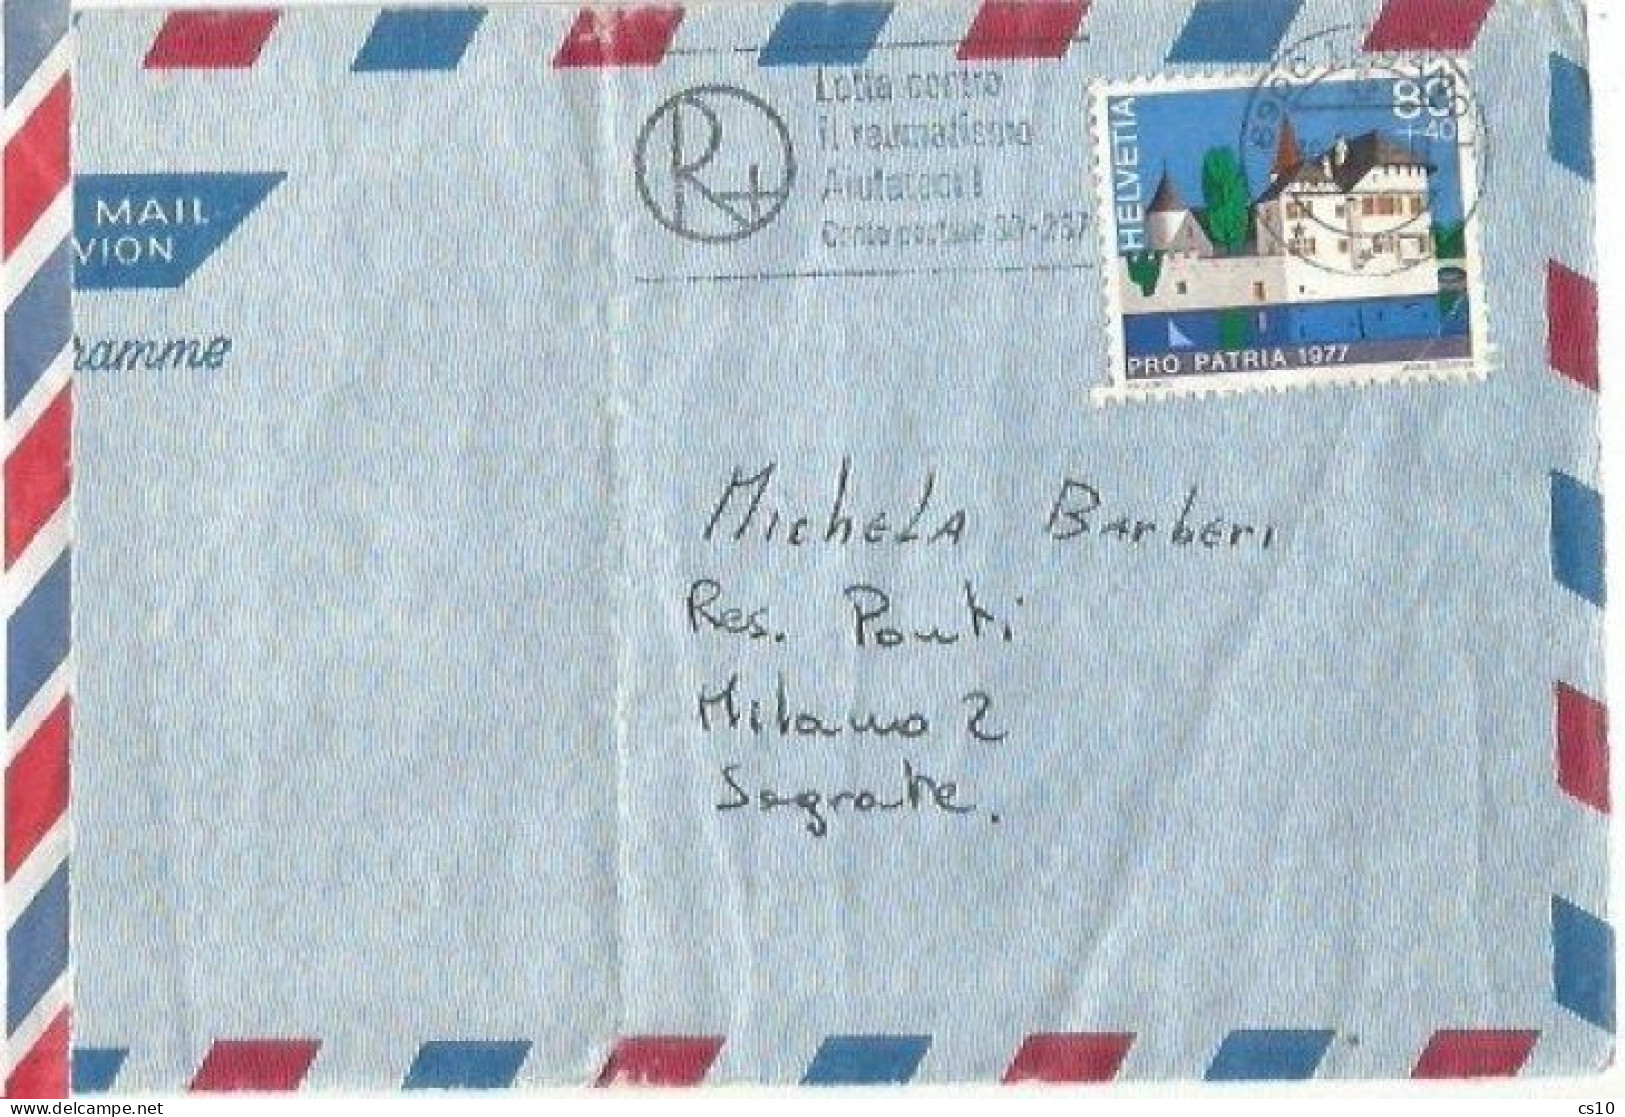 Suisse Airmail Cover Lugano 30aug1978 To Italy With ProPatria 1977 C.80+40 Solo Franking - Briefe U. Dokumente